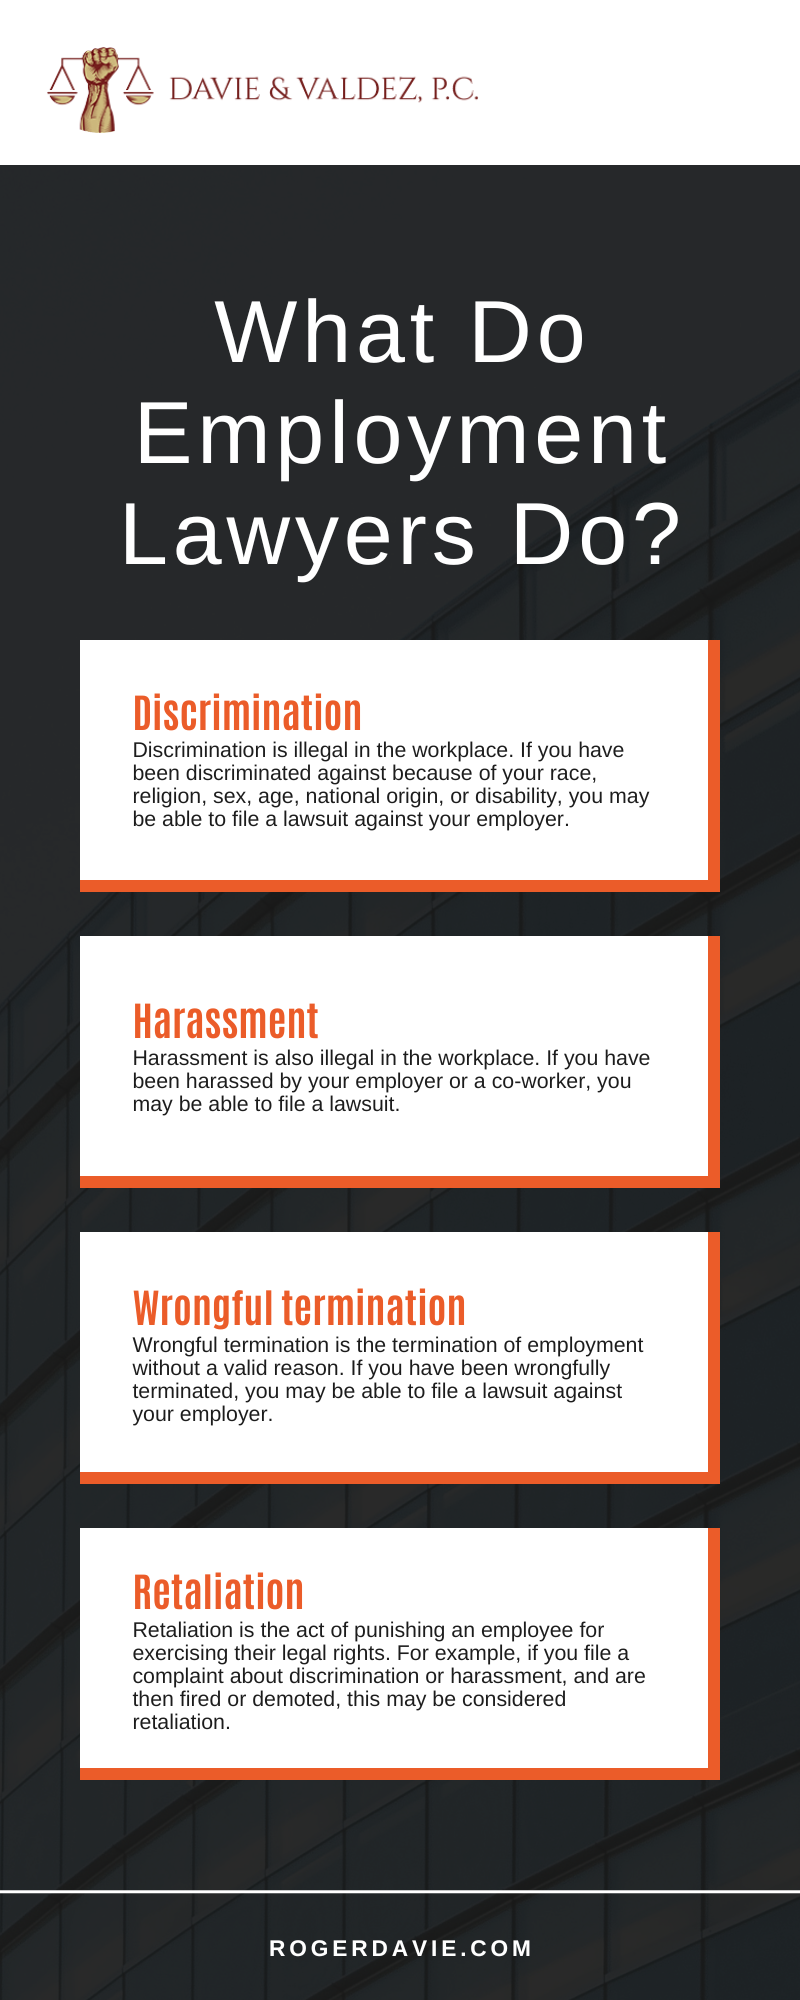 What Do Employment Lawyers Do Infographic